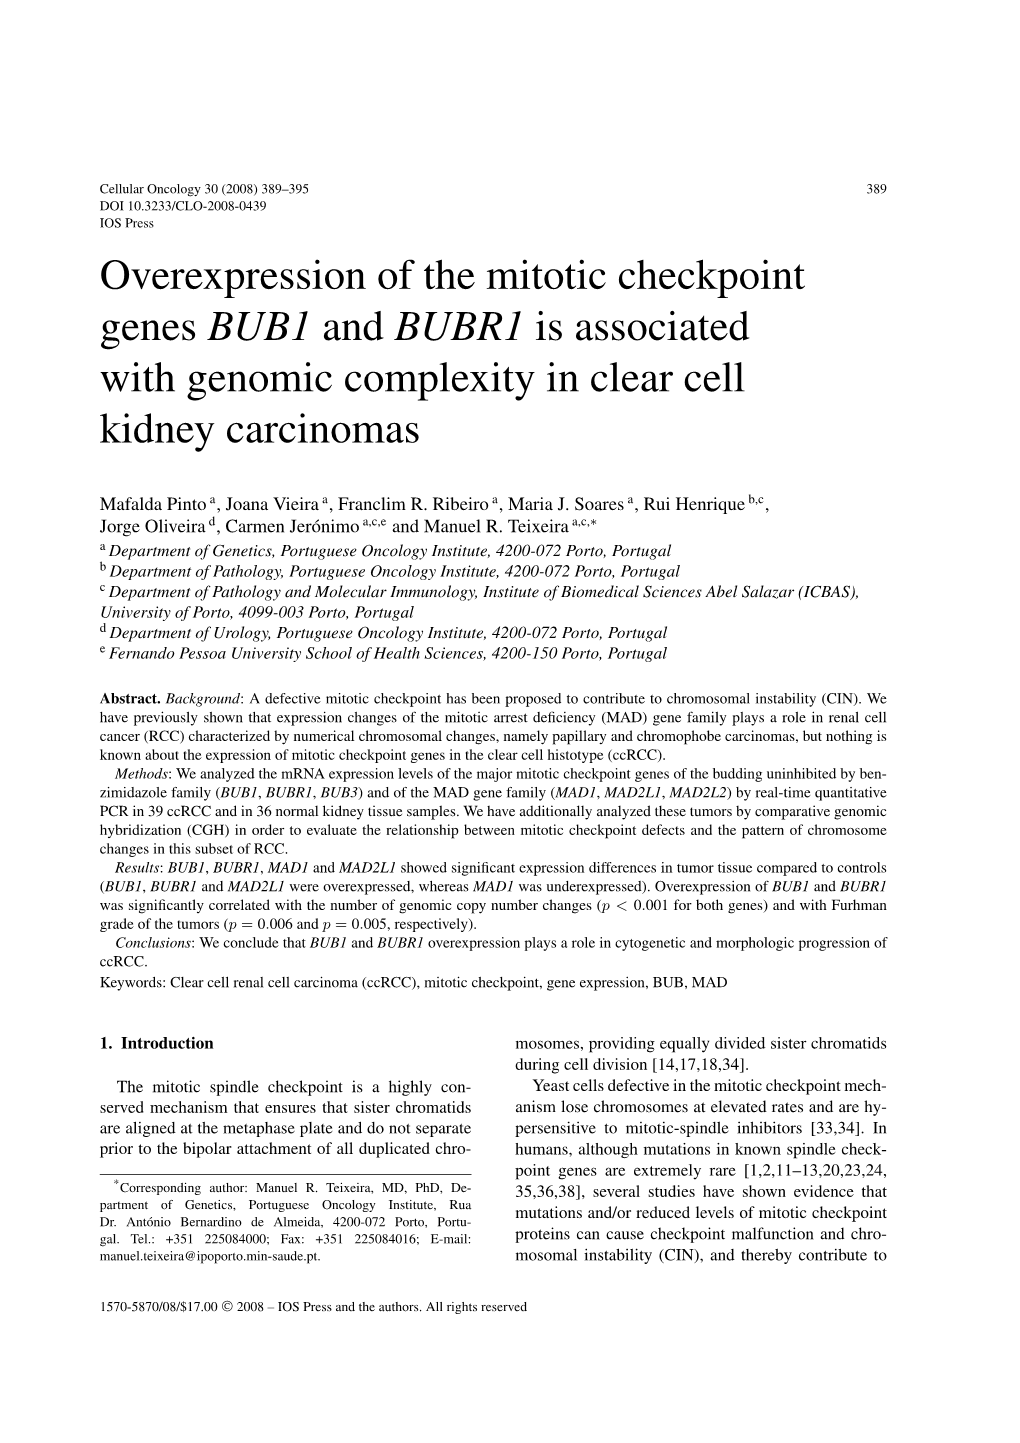 Overexpression of the Mitotic Checkpoint Genes BUB1 and BUBR1 Is Associated with Genomic Complexity in Clear Cell Kidney Carcinomas